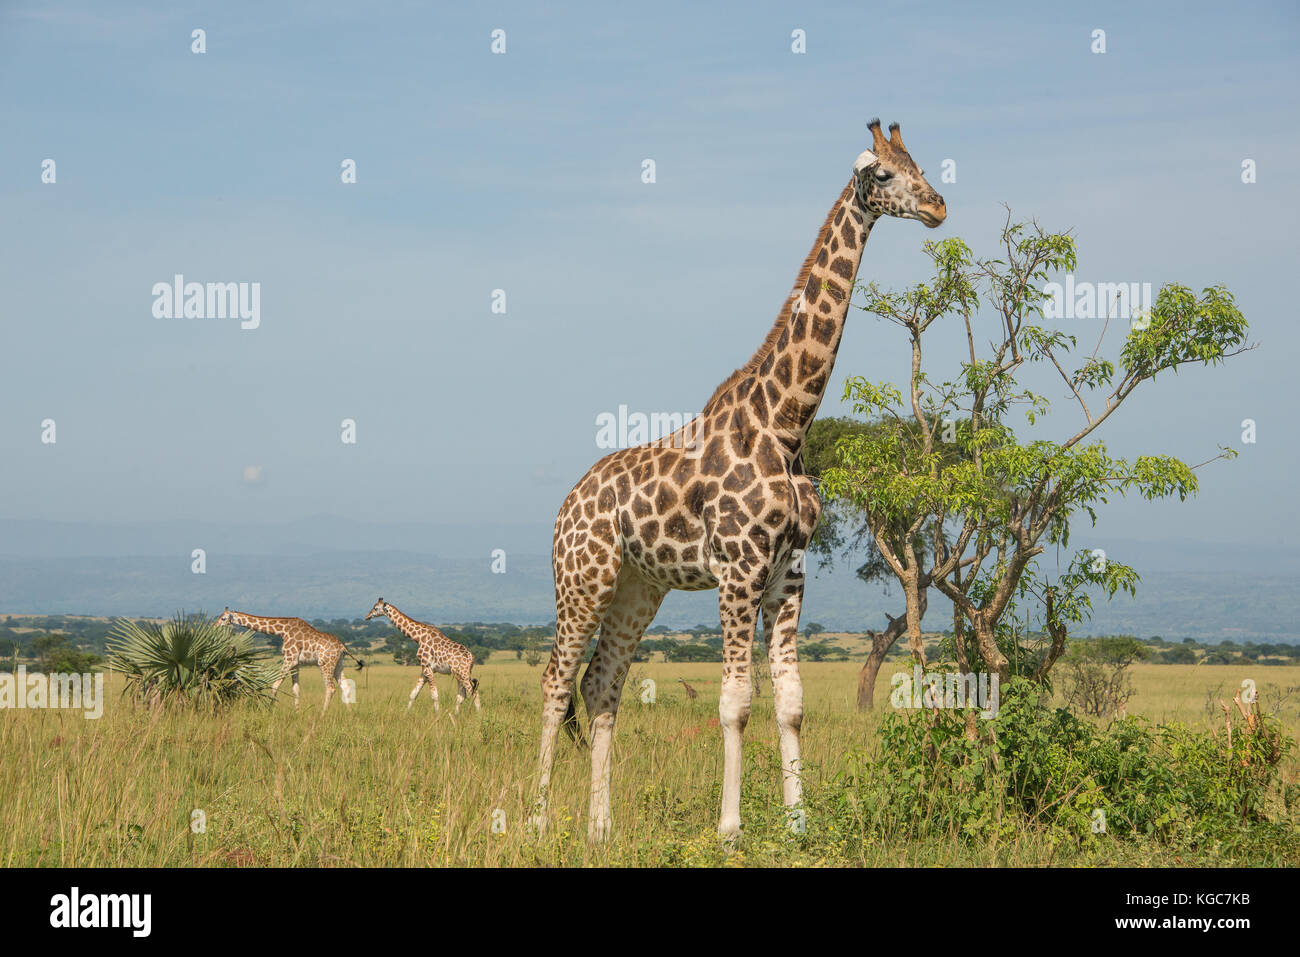 Rothschild's giraffe, an Endangered subspecies found in only two Parks; Murchison Falls National Park, Uganda. Stock Photo